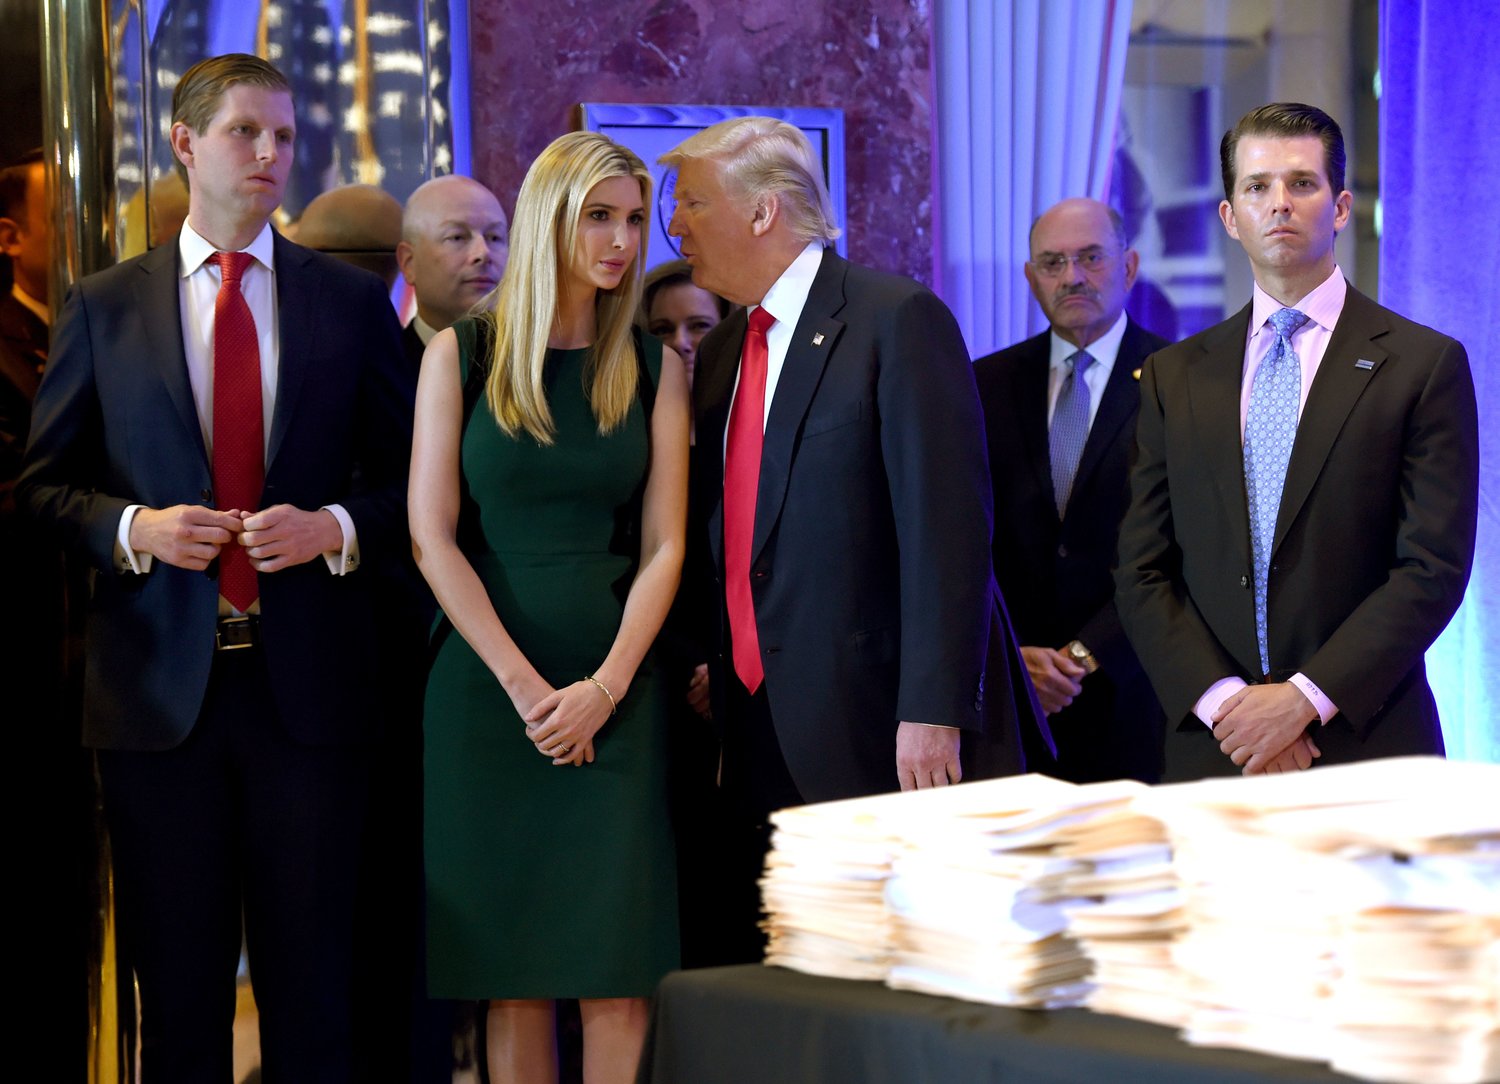 In this file photo from Jan. 11, 2017, Donald Trump along with his children Eric, left, Ivanka and Donald Jr. arrive for a news conference at Trump Tower in New York, accompanied by Allen Weisselberg, second from right, the chief financial officer of The Trump Organization. (Timothy A. Clary/AFP/Getty Images/TNS)